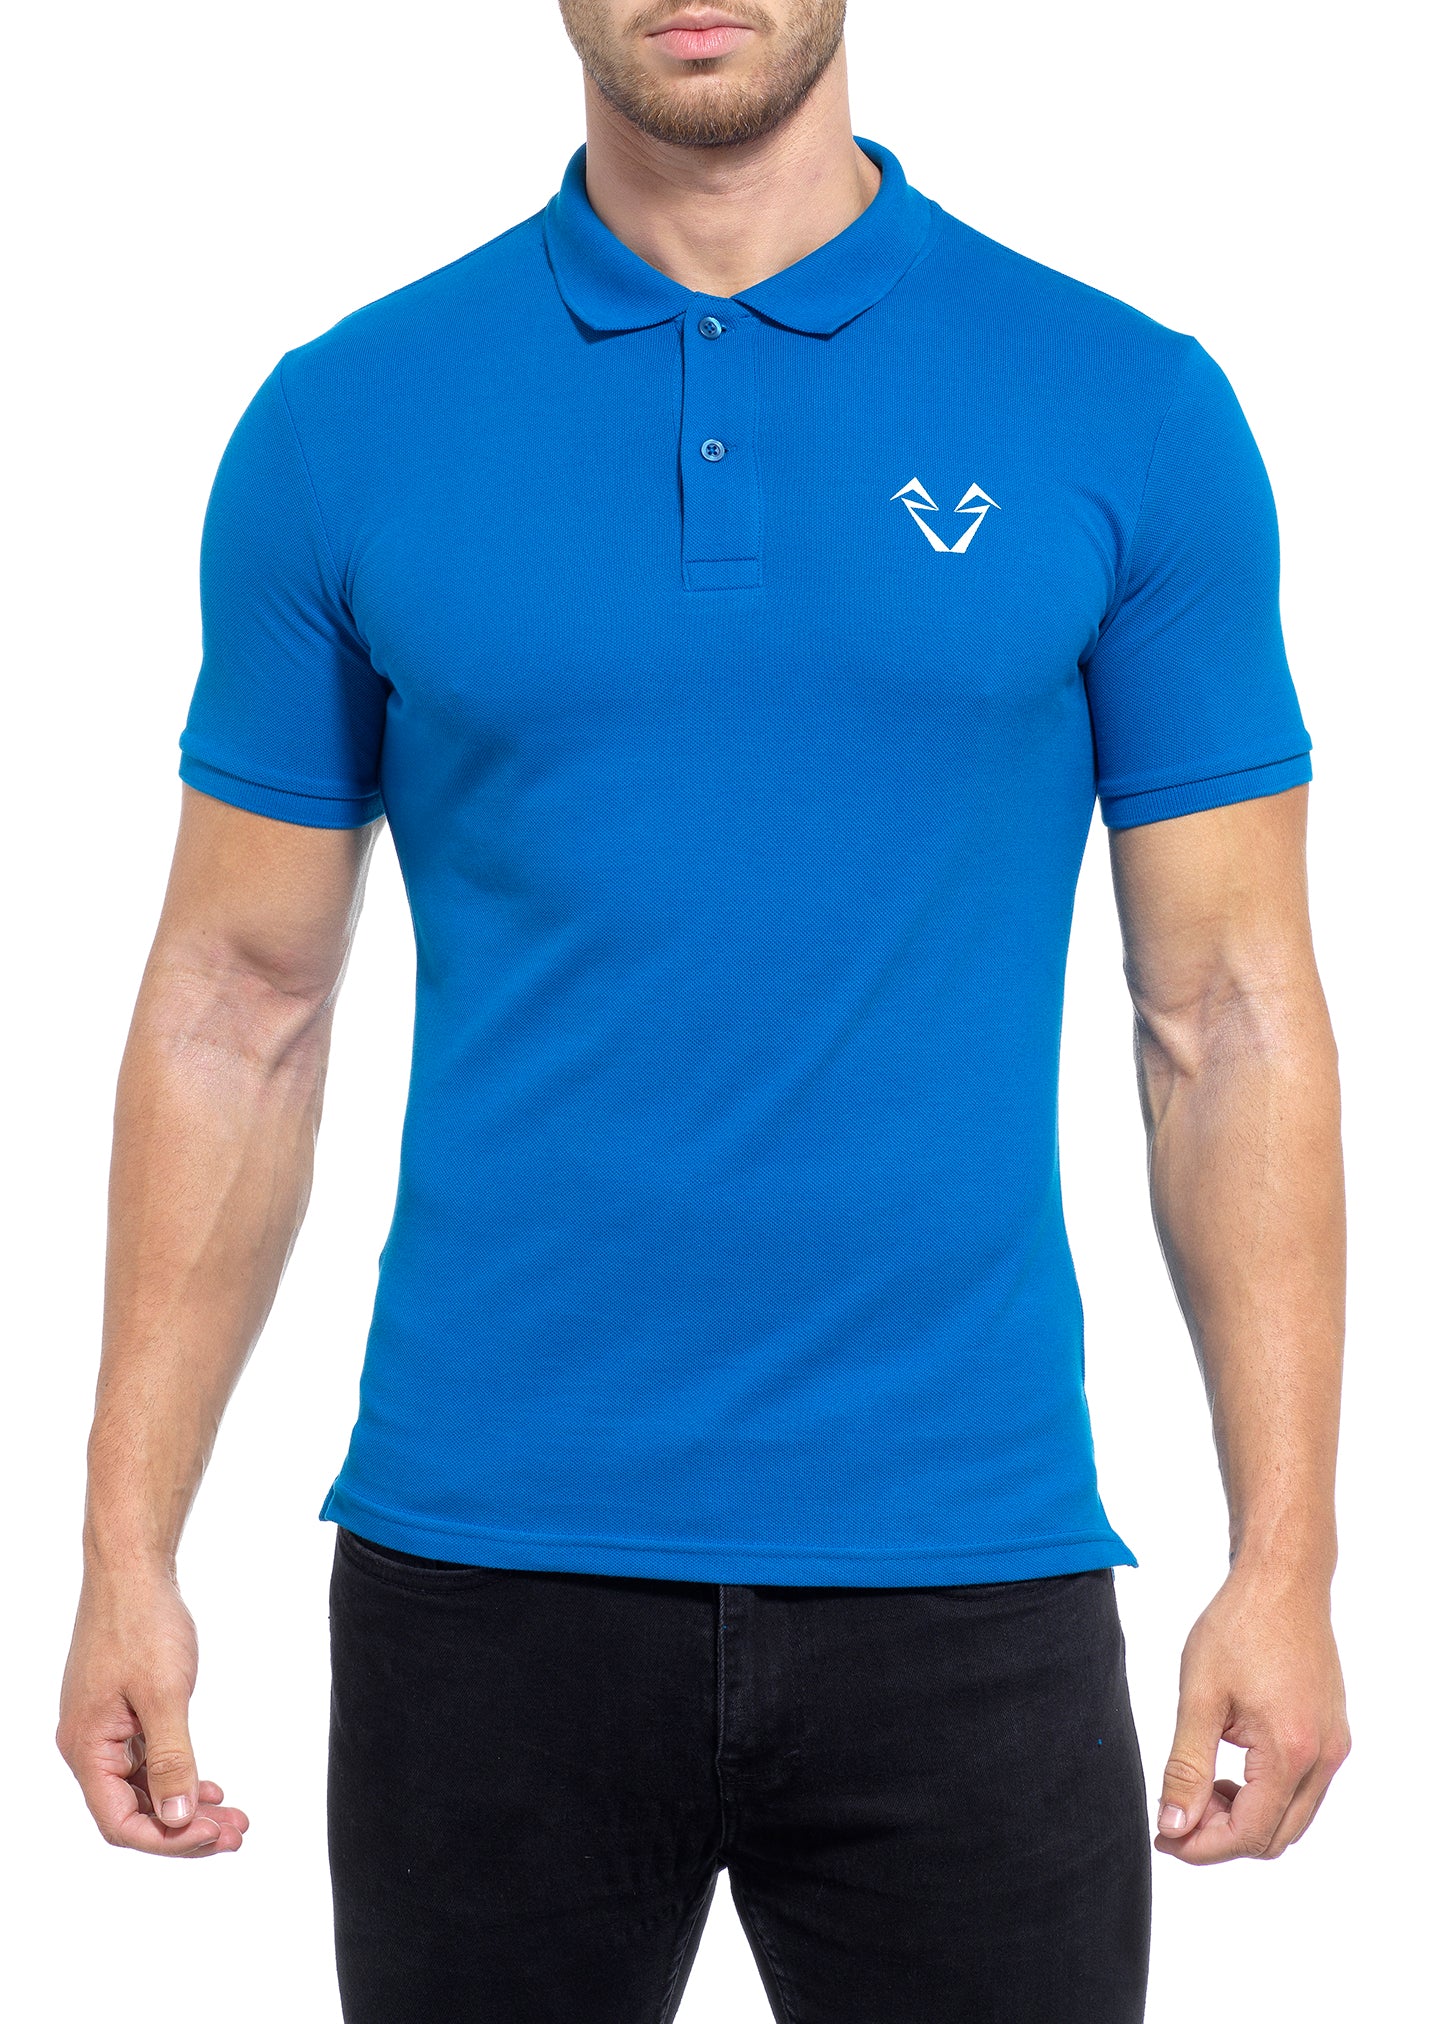 Mens Muscle Fit Royal Blue Polo Shirts